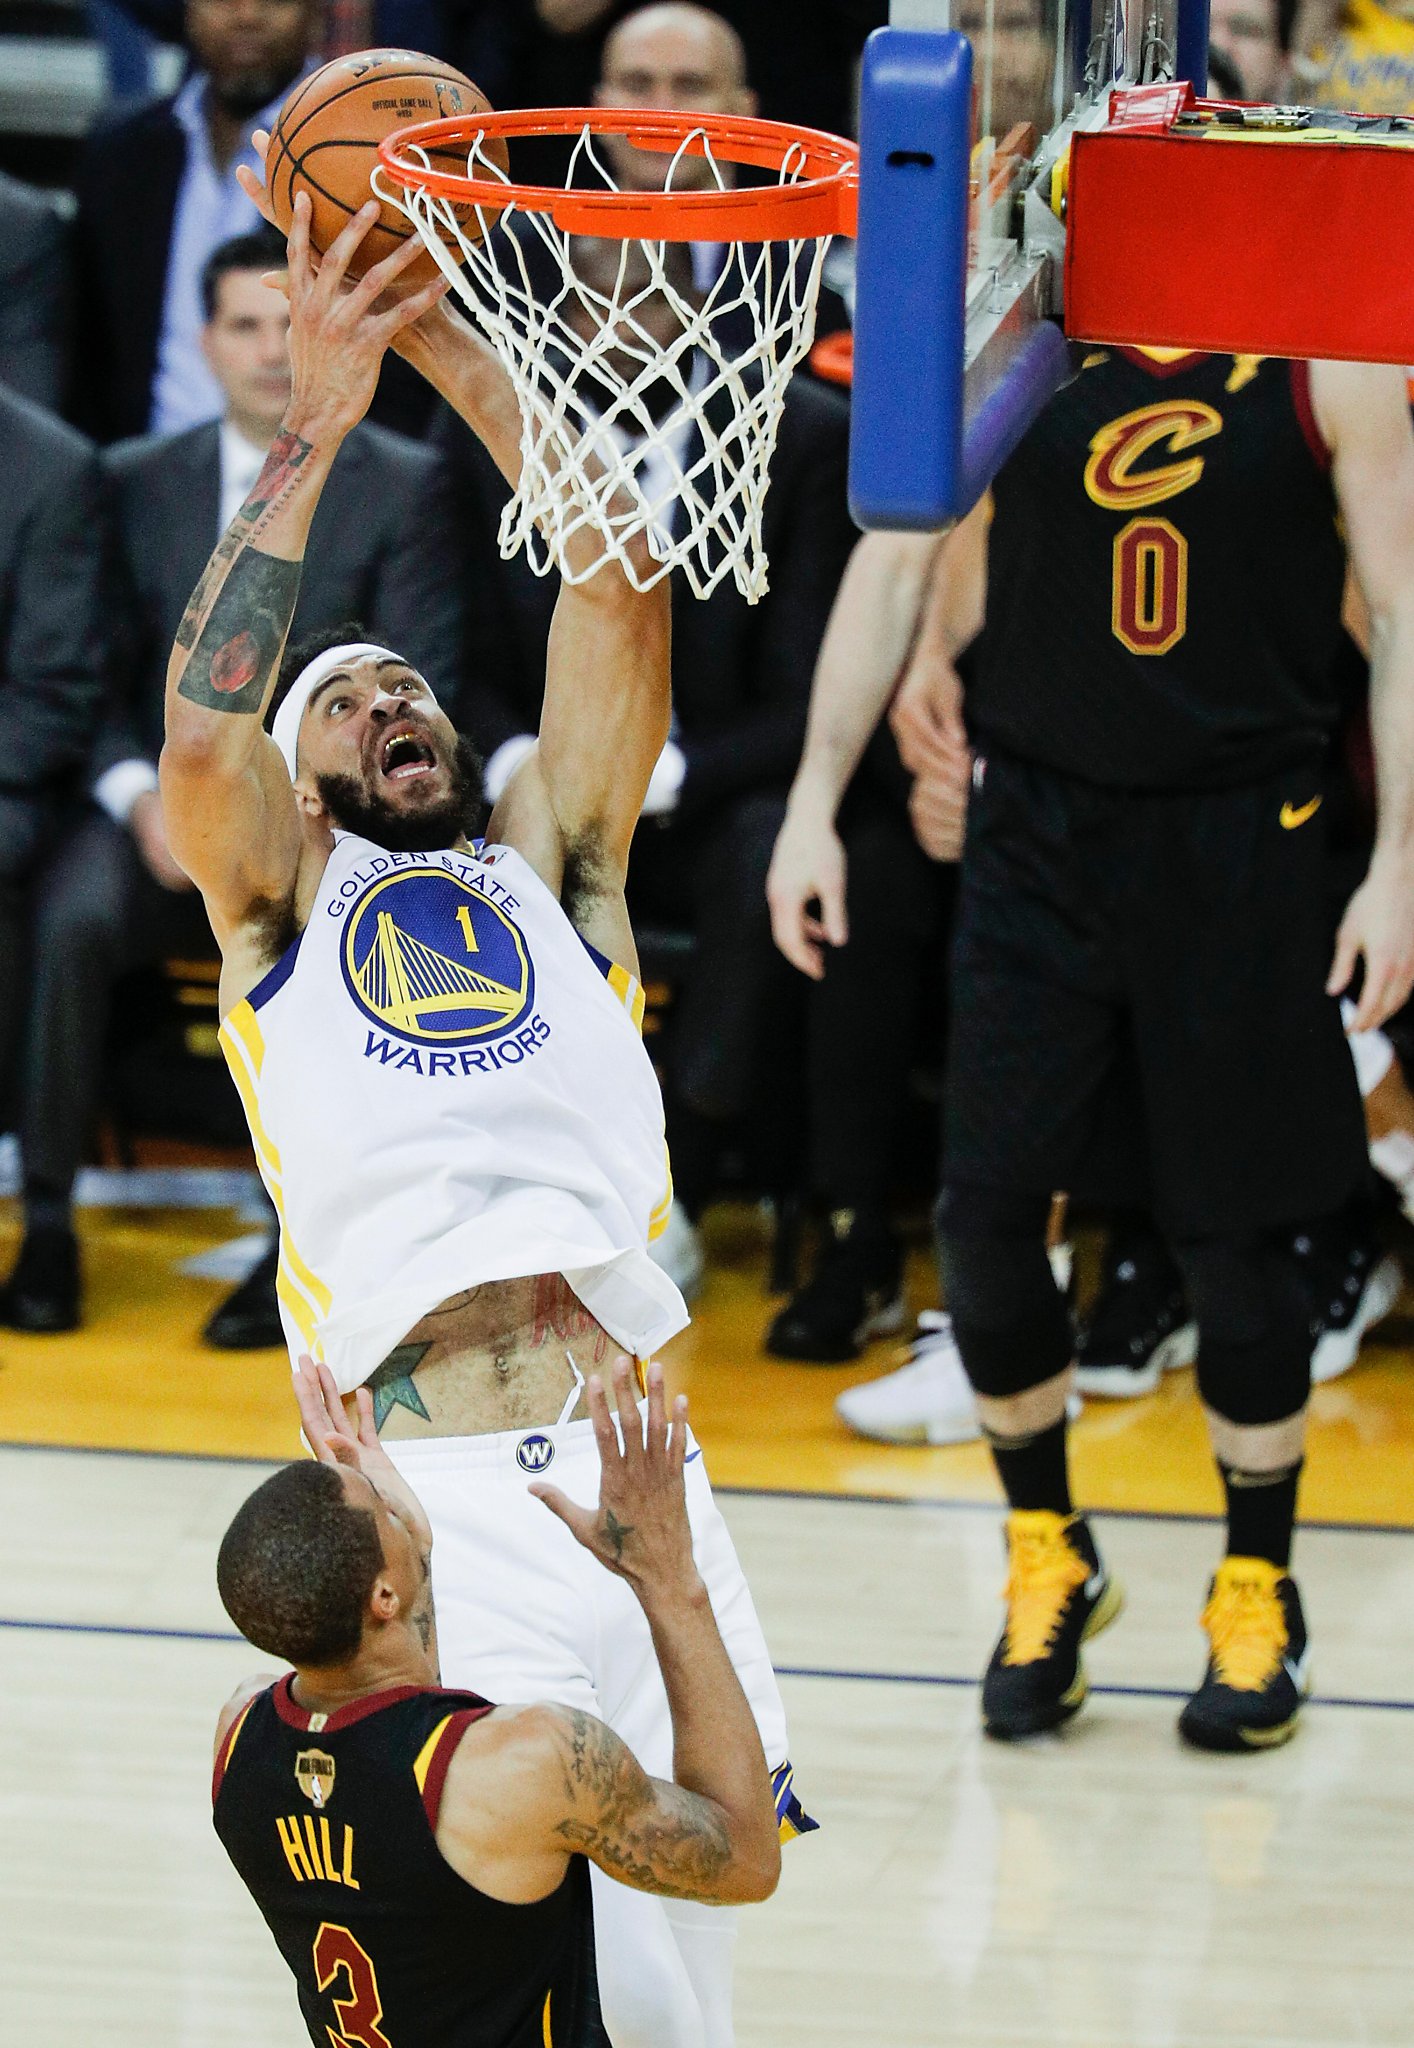 Watch: JaVale McGee has wide-open dunk fail in NBA Finals 